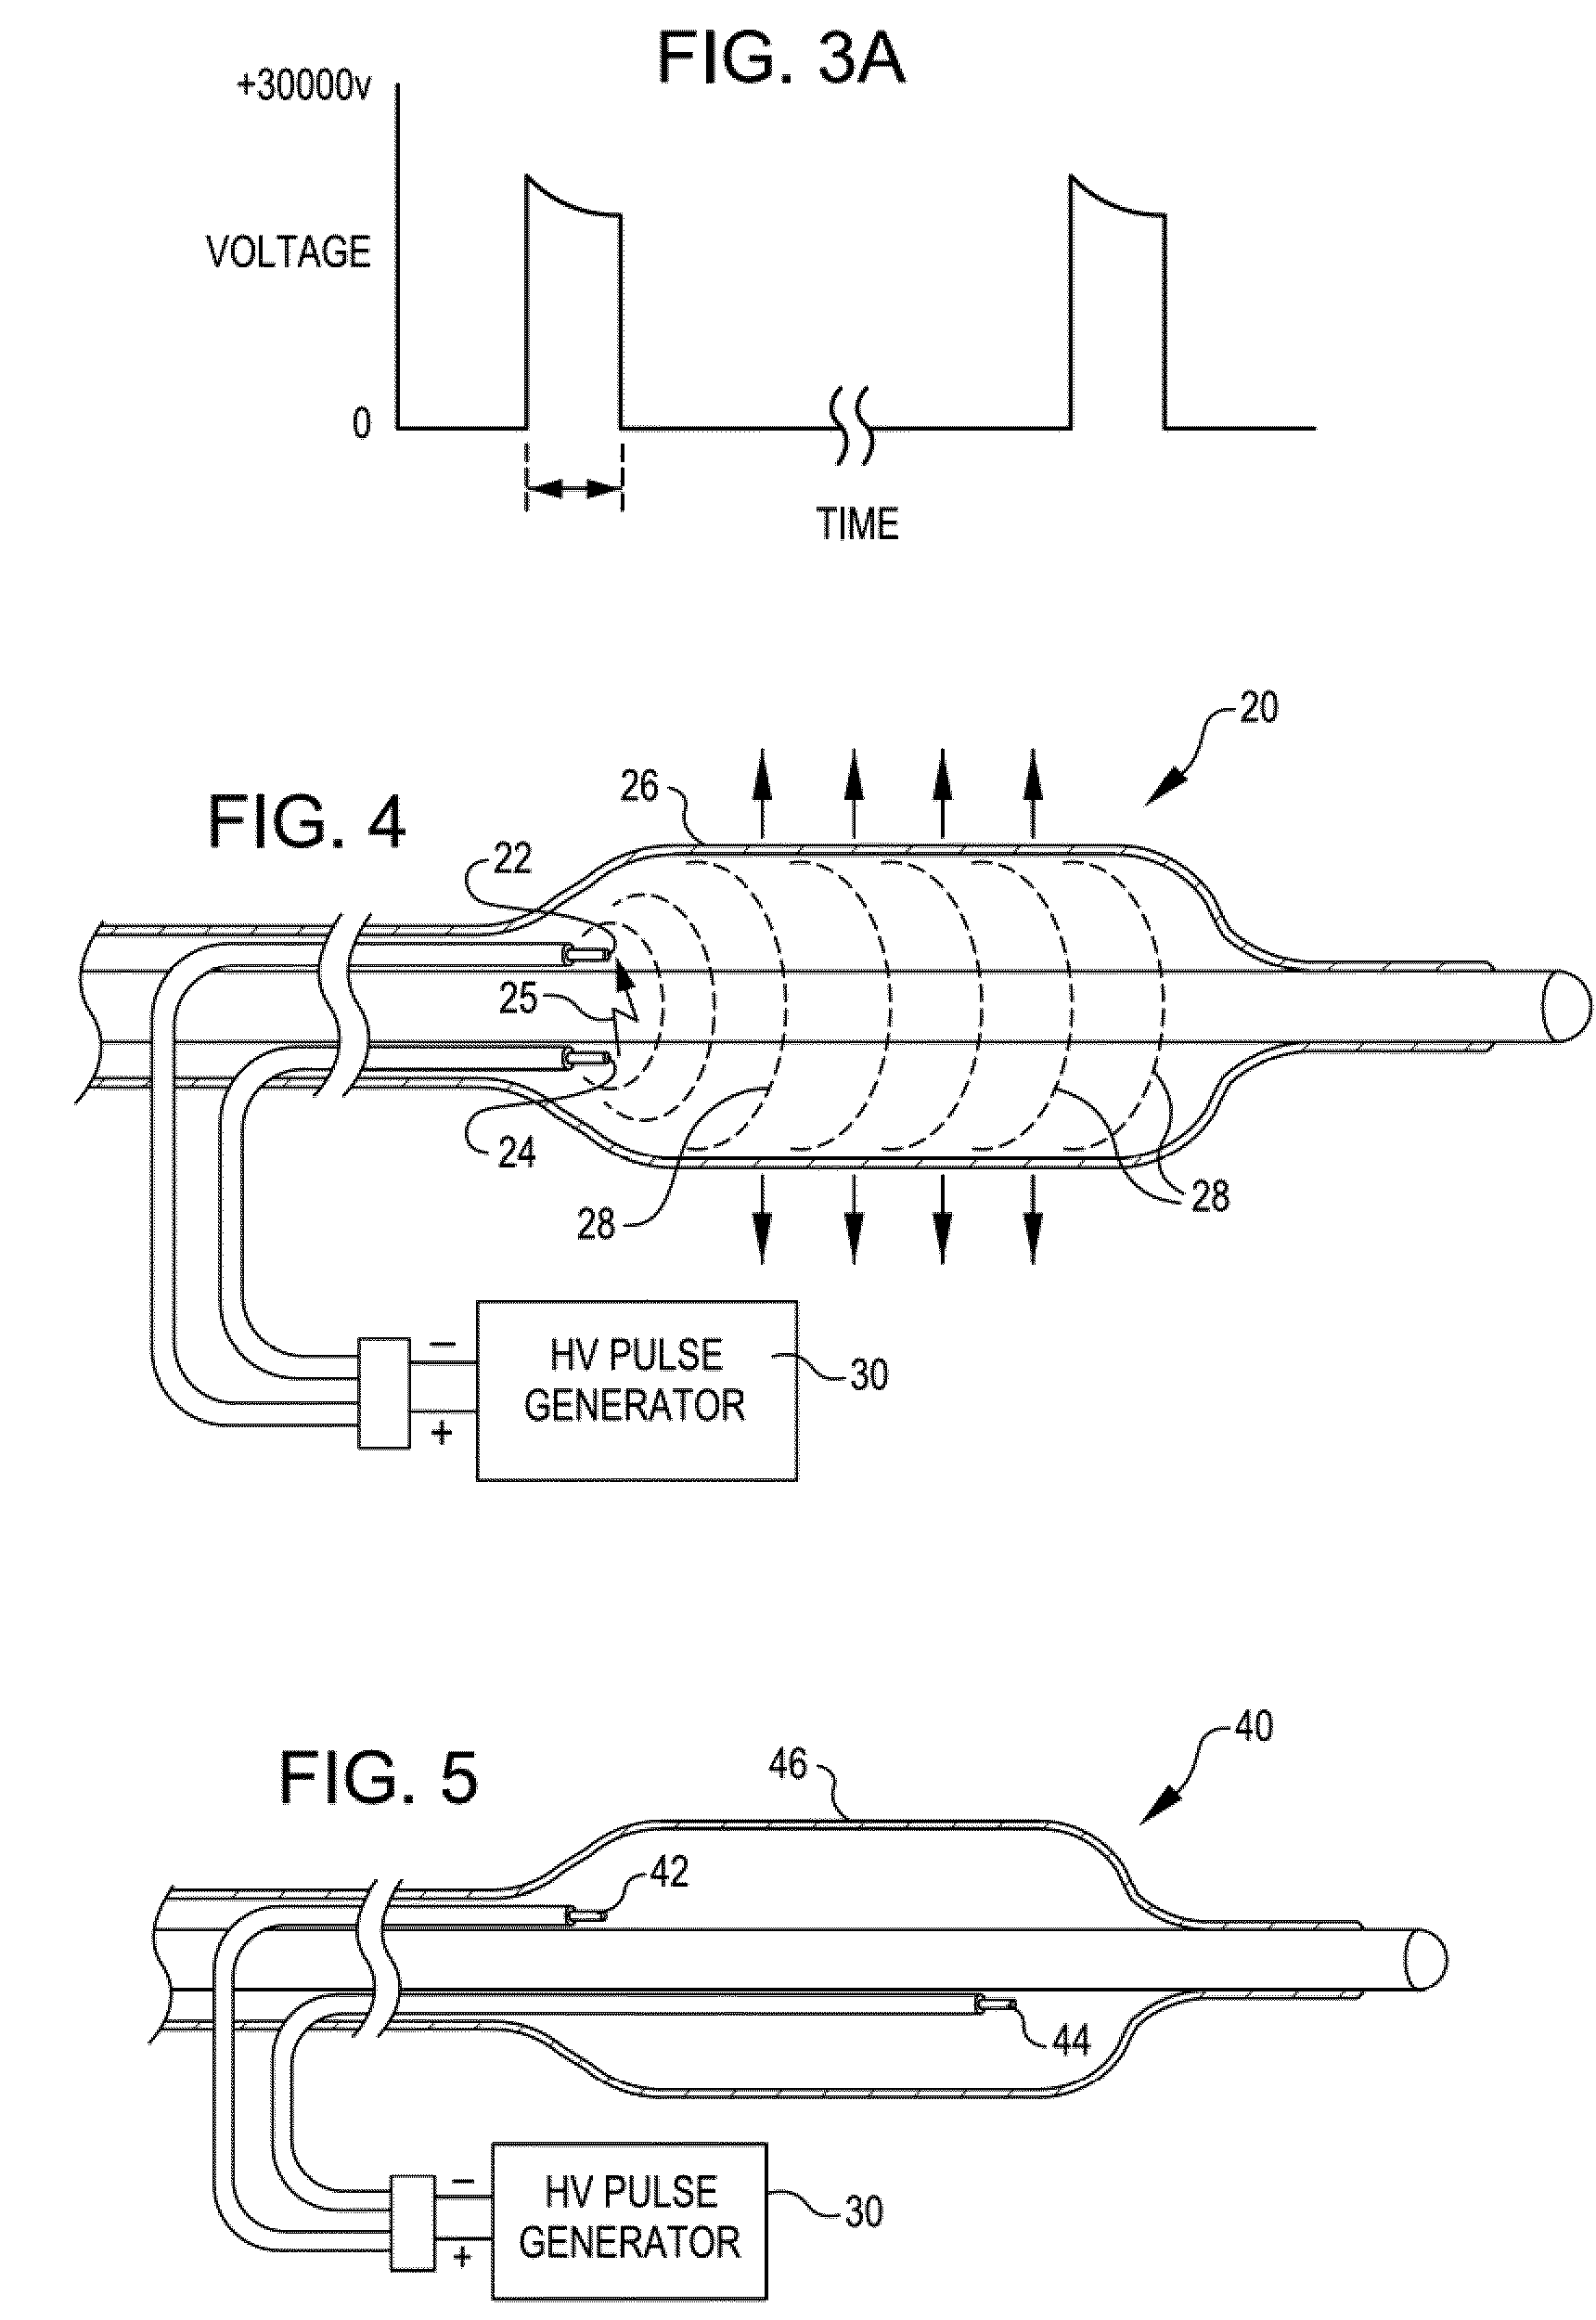 Method of providing embolic protection and shockwave angioplasty therapy to a vessel